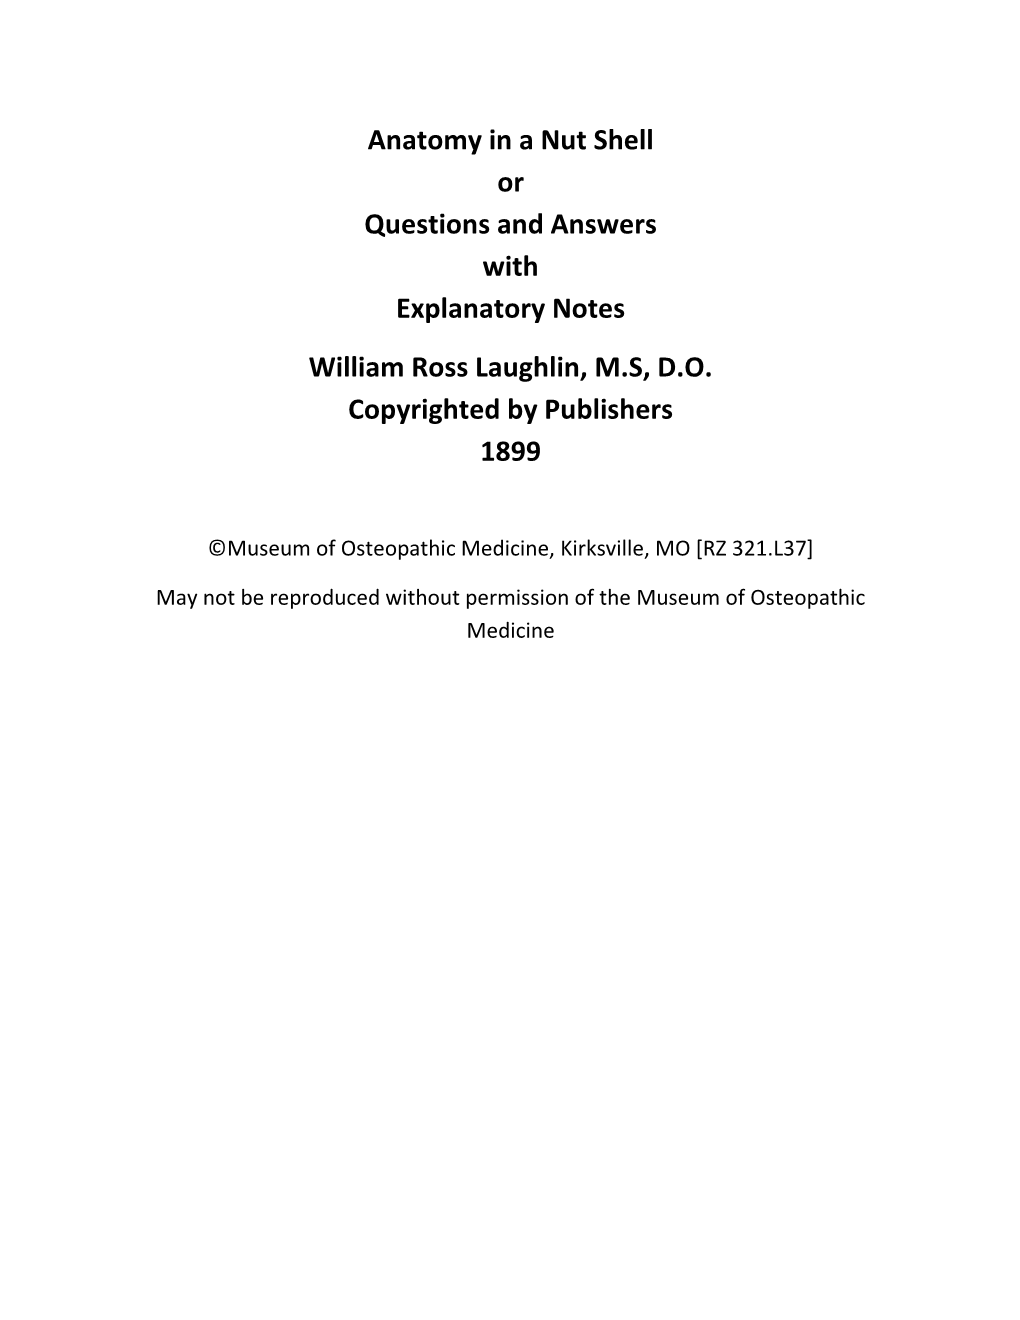 Anatomy in a Nut Shell Or Questions and Answers with Explanatory Notes William Ross Laughlin, M.S, D.O